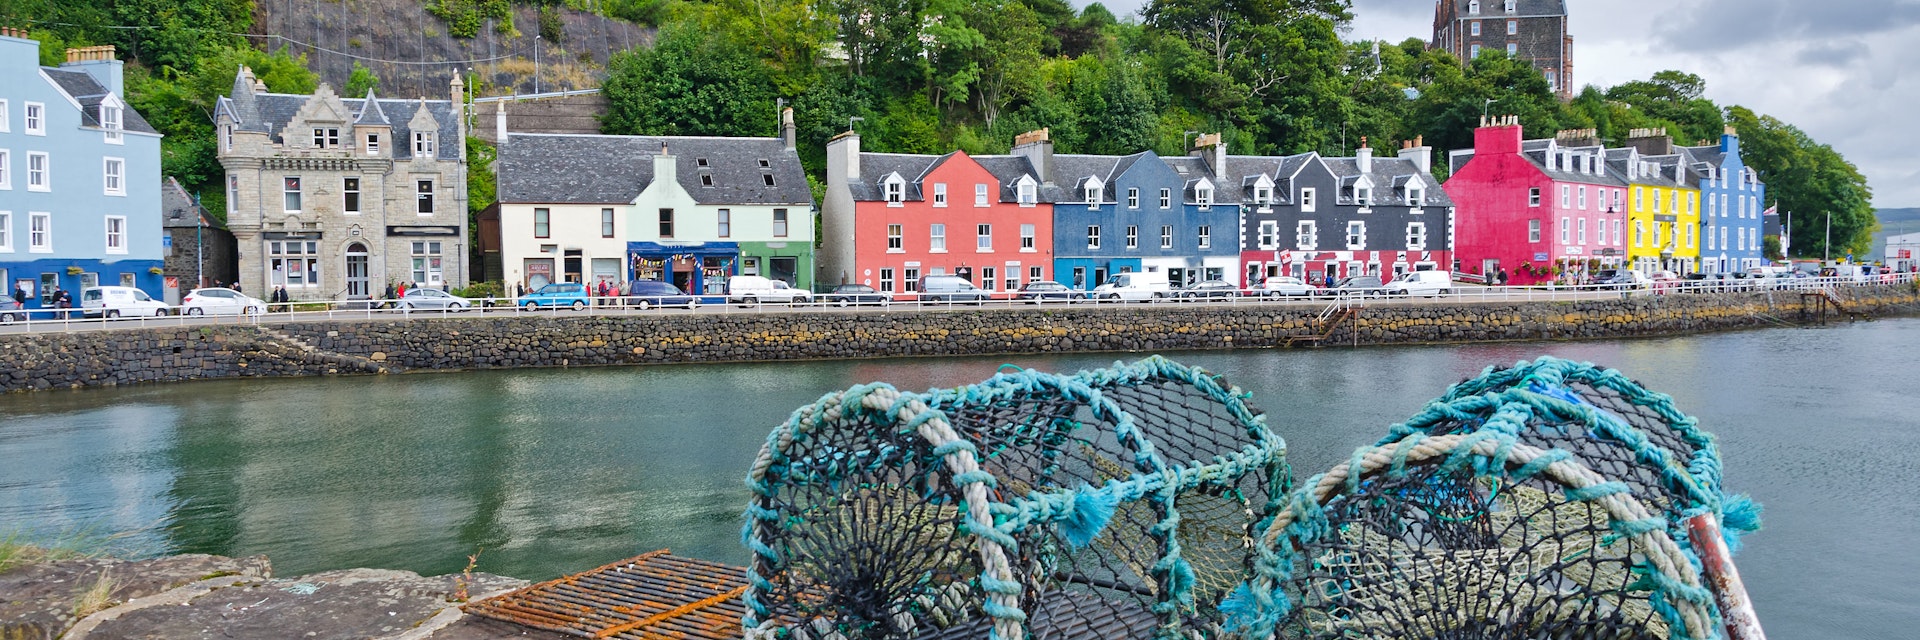 Fishing traps on a wall in summertime in the town of Tobermory on the isle of Mull in the inner Hebrides.
